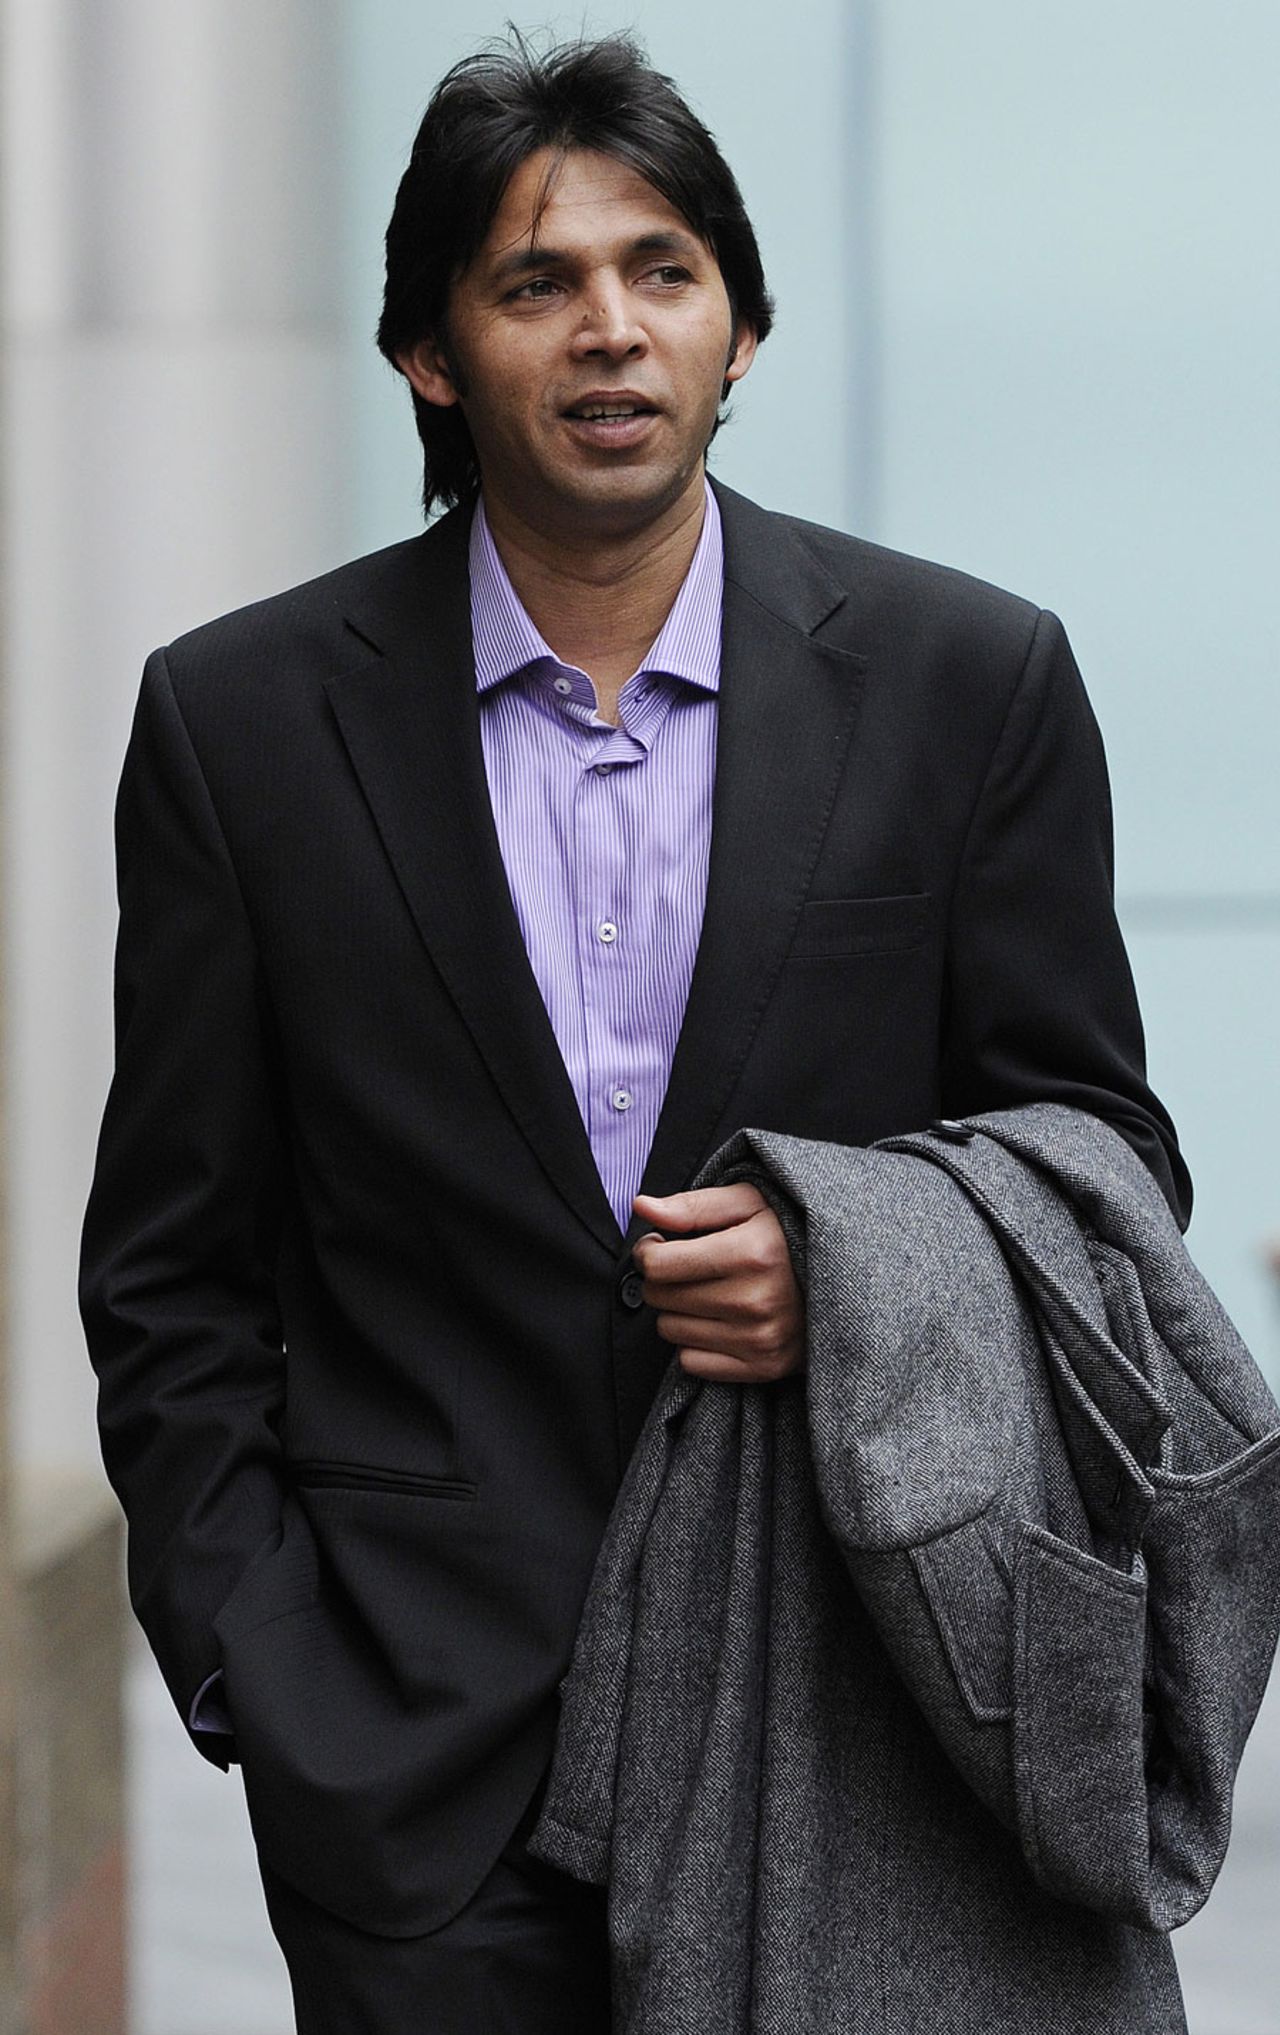 Mohammad Asif outside the Southwark Crown Court, London, October 31, 2011